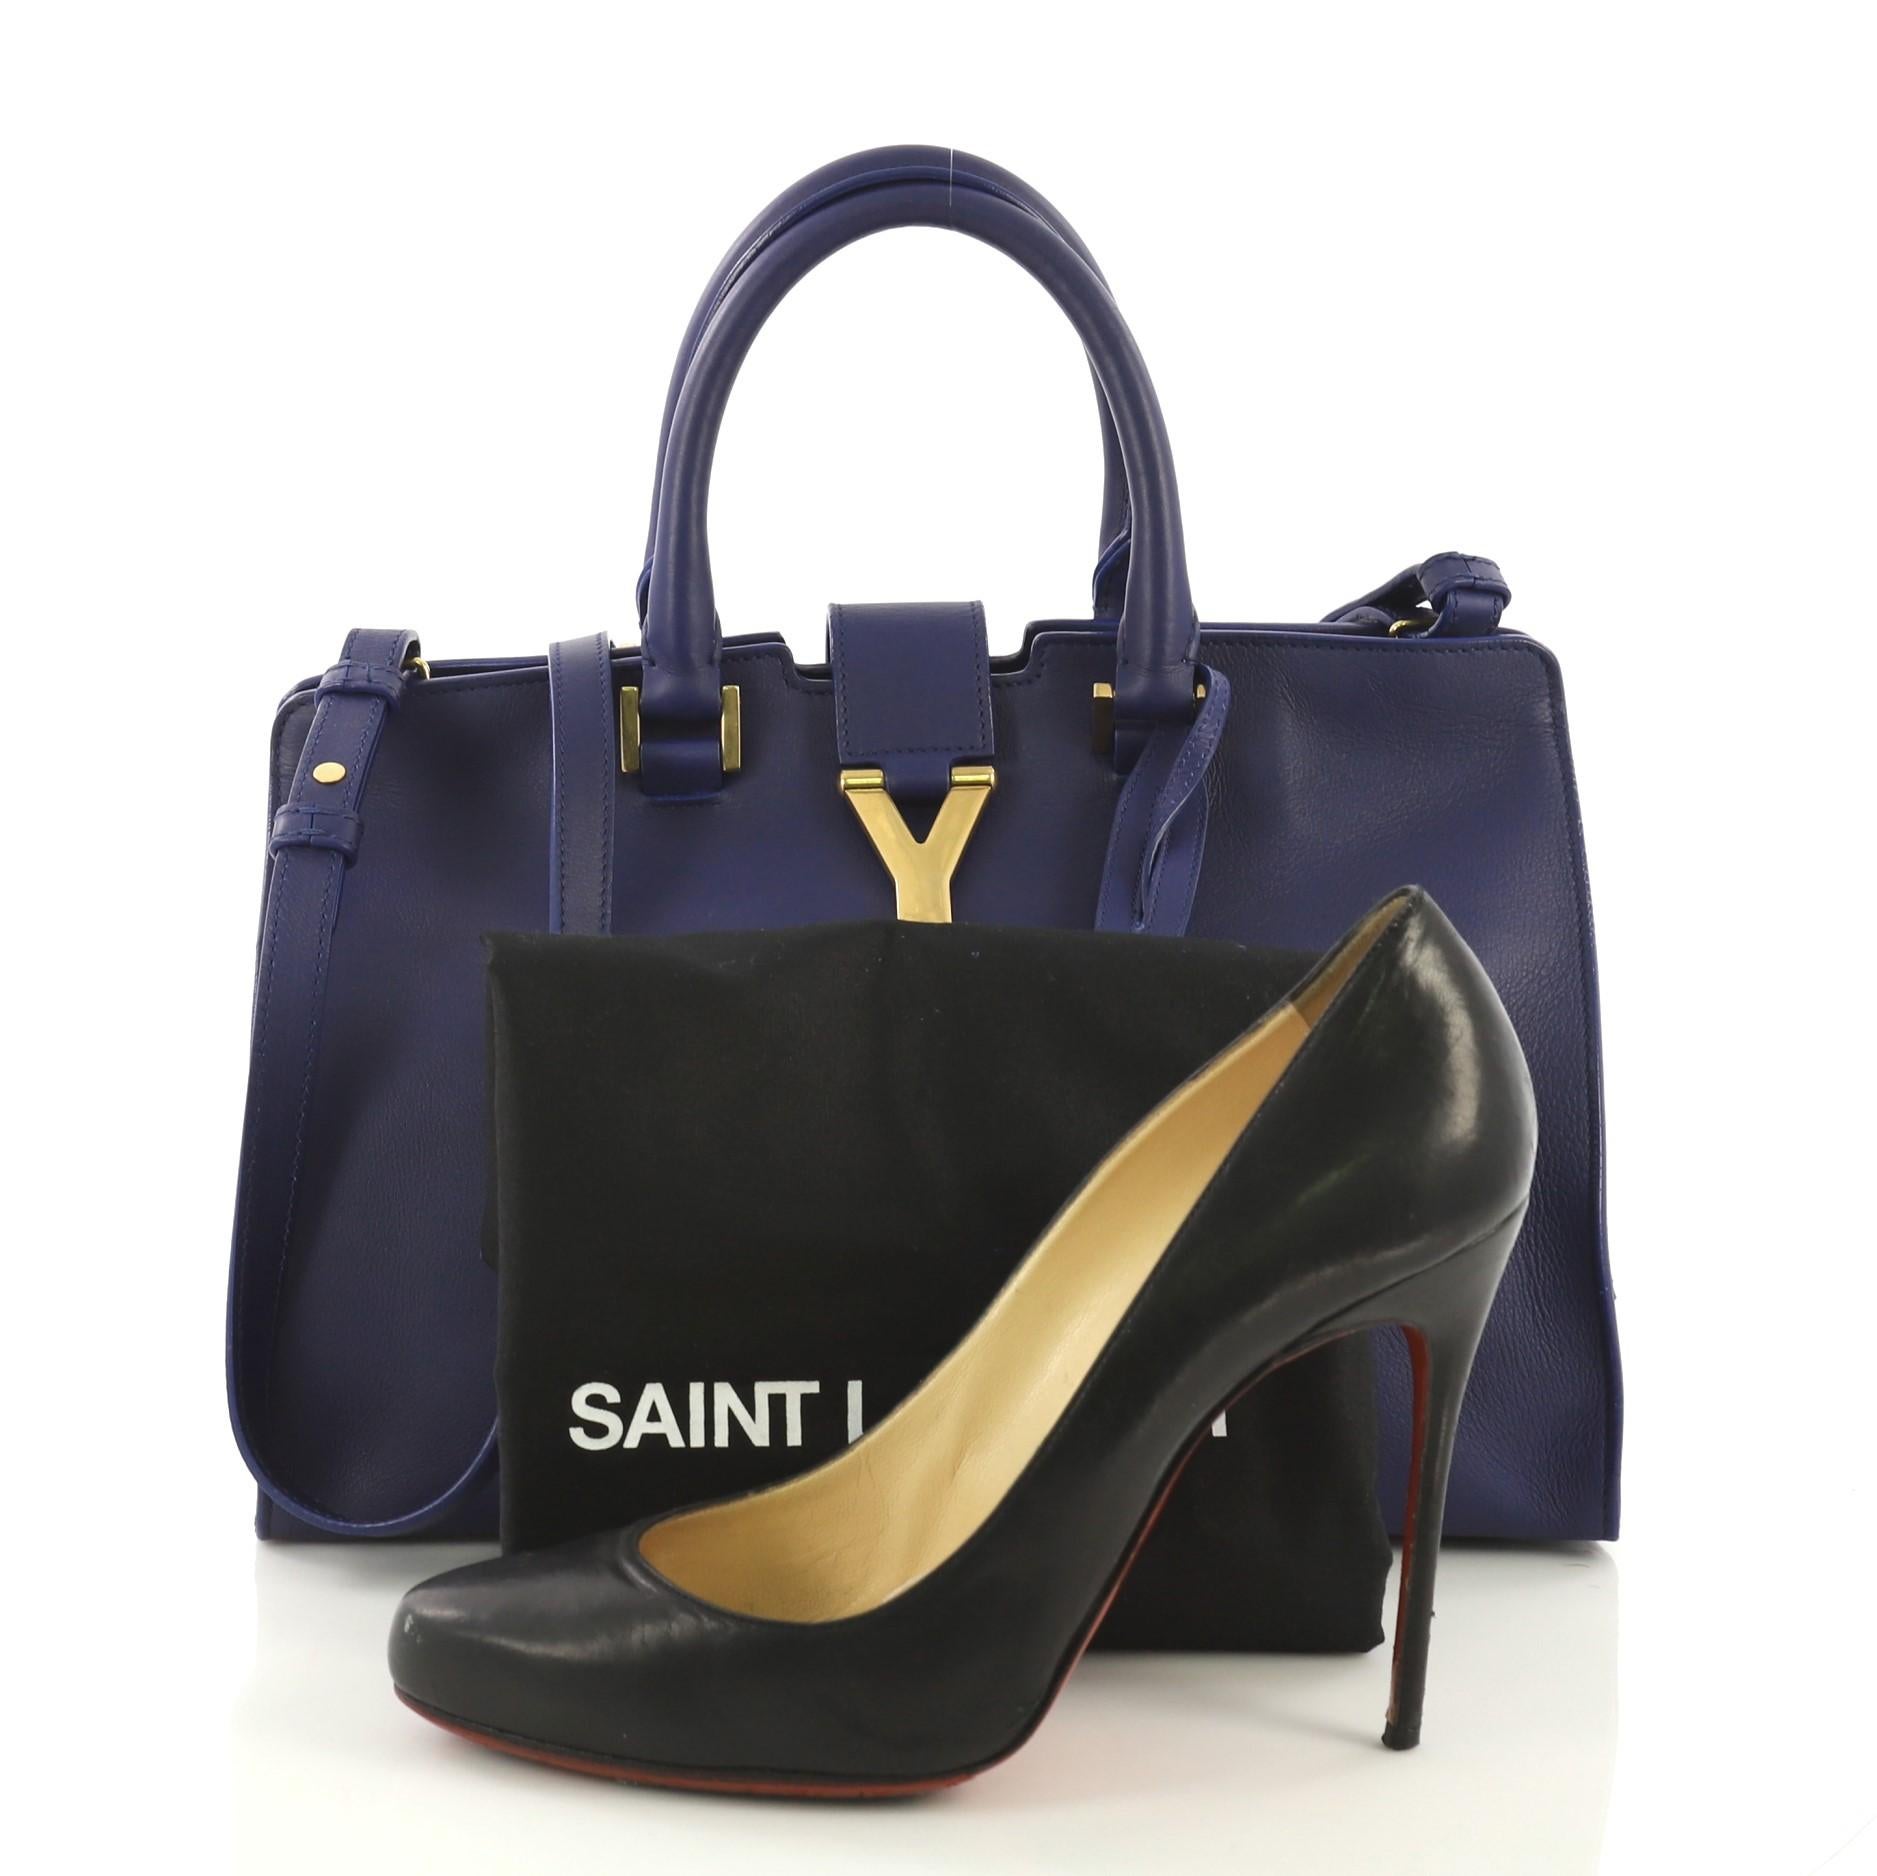 This Saint Laurent Classic Y Cabas Leather Small, crafted from blue leather, features dual rolled leather handles, signature Yves Saint Laurent's 'Y' top flap hardware piece, protective base studs, and gold-tone hardware. Its top zip closure opens